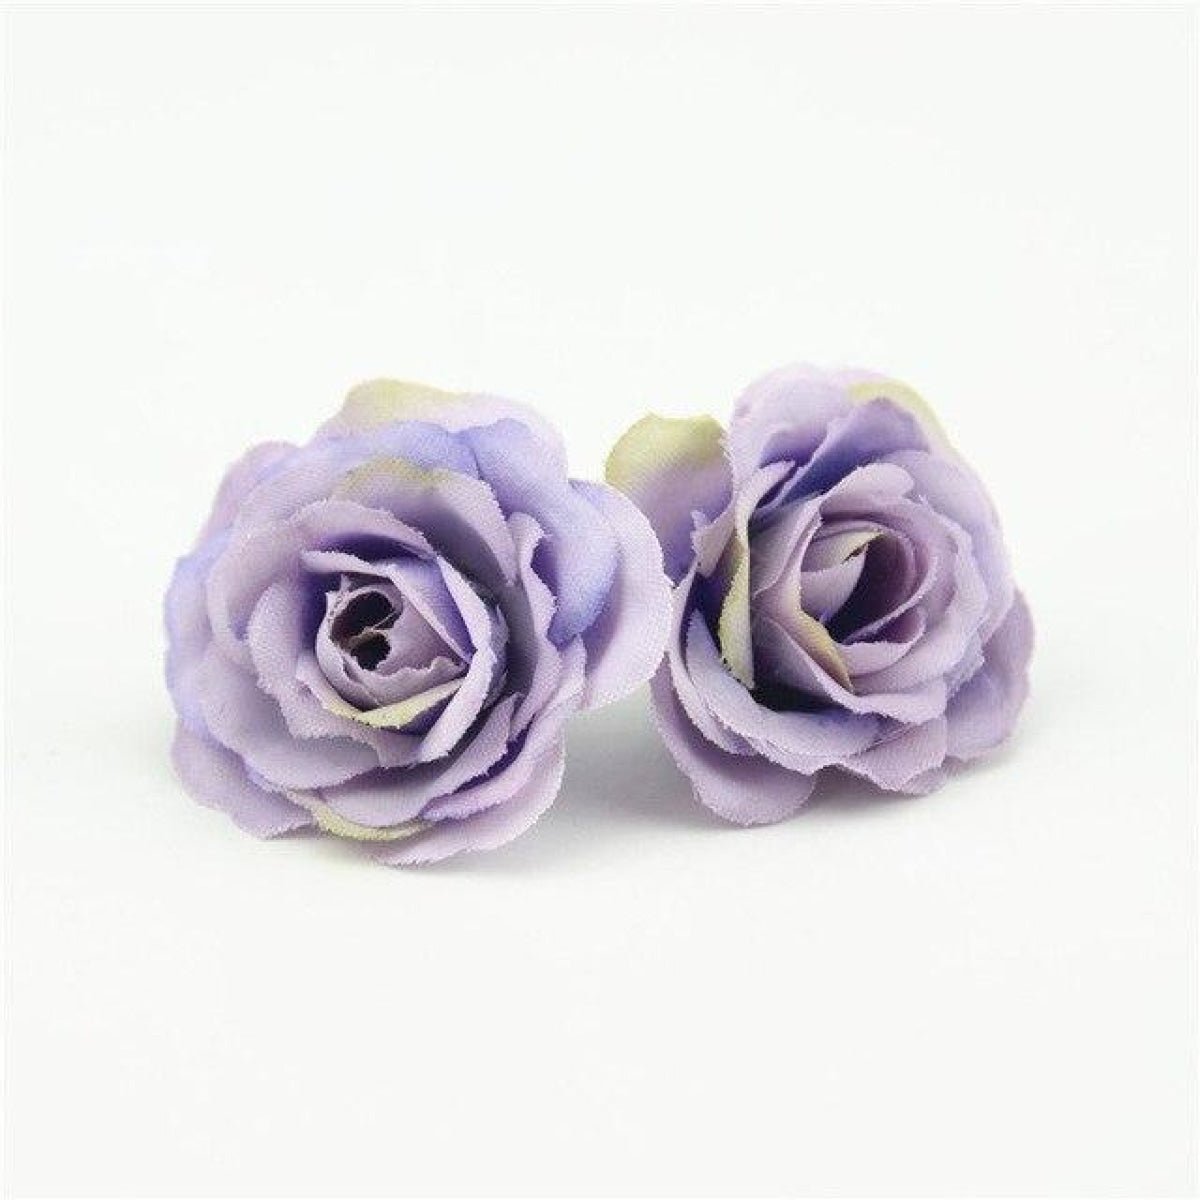 10pcs 2.5cm Mini Rose Cloth Artificial Flower For Wedding Party Home Decorations - Light purple - - Asia Sell